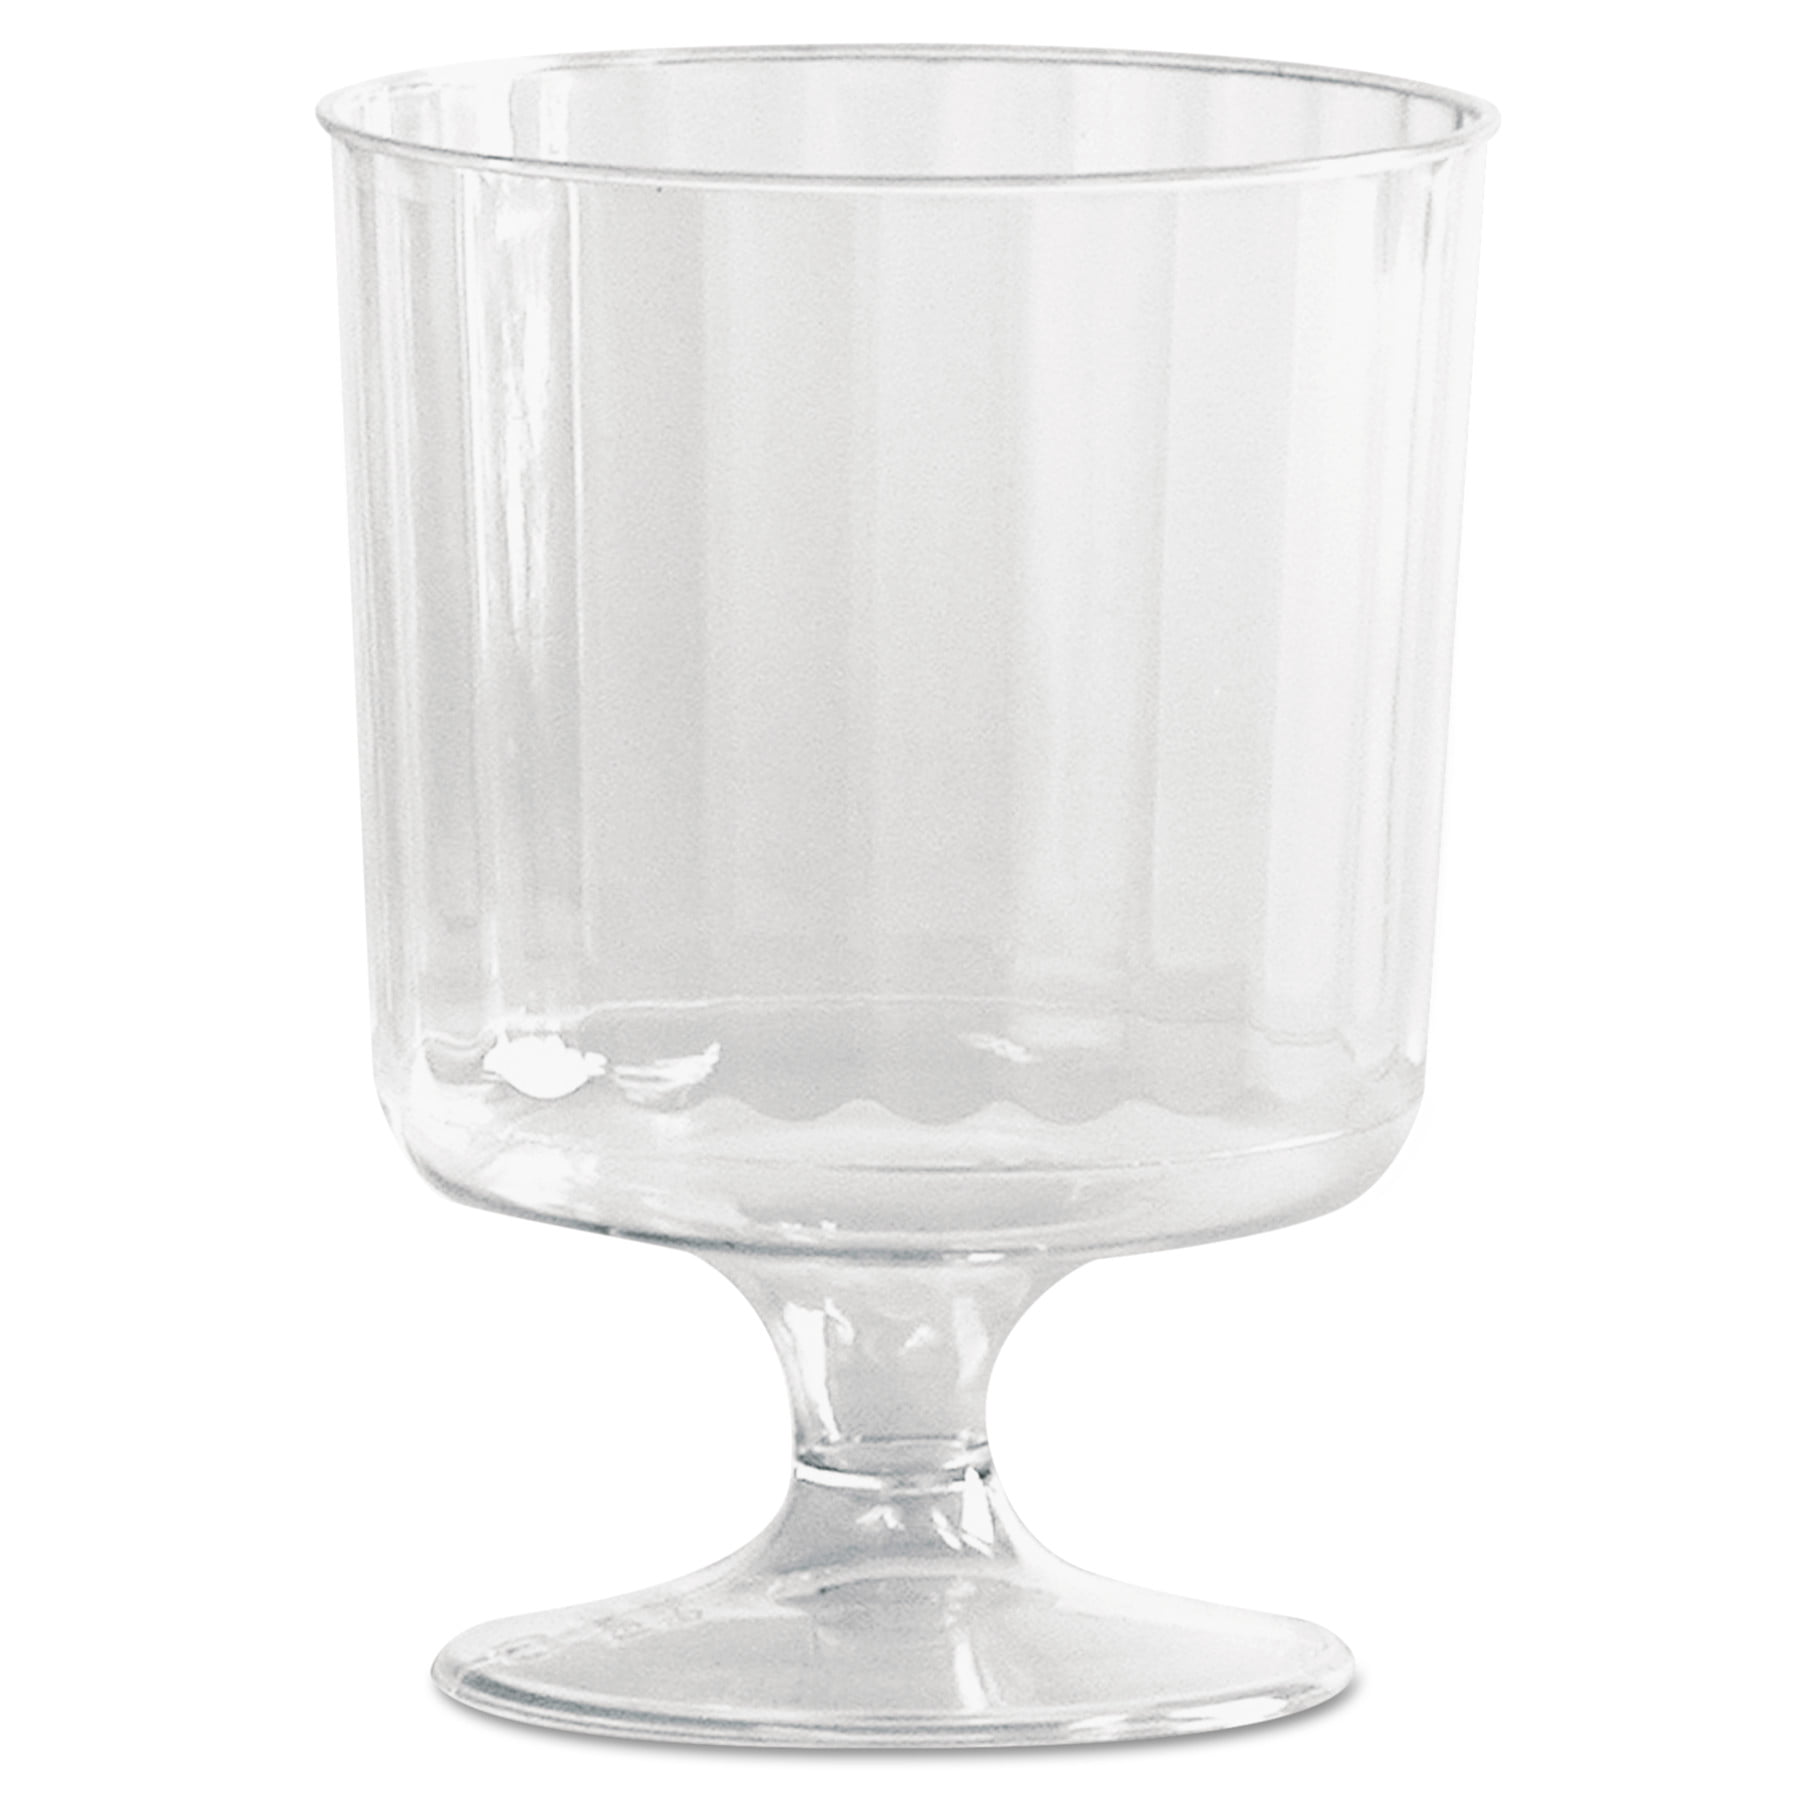 Stock Your Home 5 oz Clear Plastic Wine Glass (40 Pack) - BPA Free &  Recyclable - Shatterproof Wine Goblet - Disposable & Reusable Cups for  Champagne, Dessert, Food Samples, Catering, Weddings 